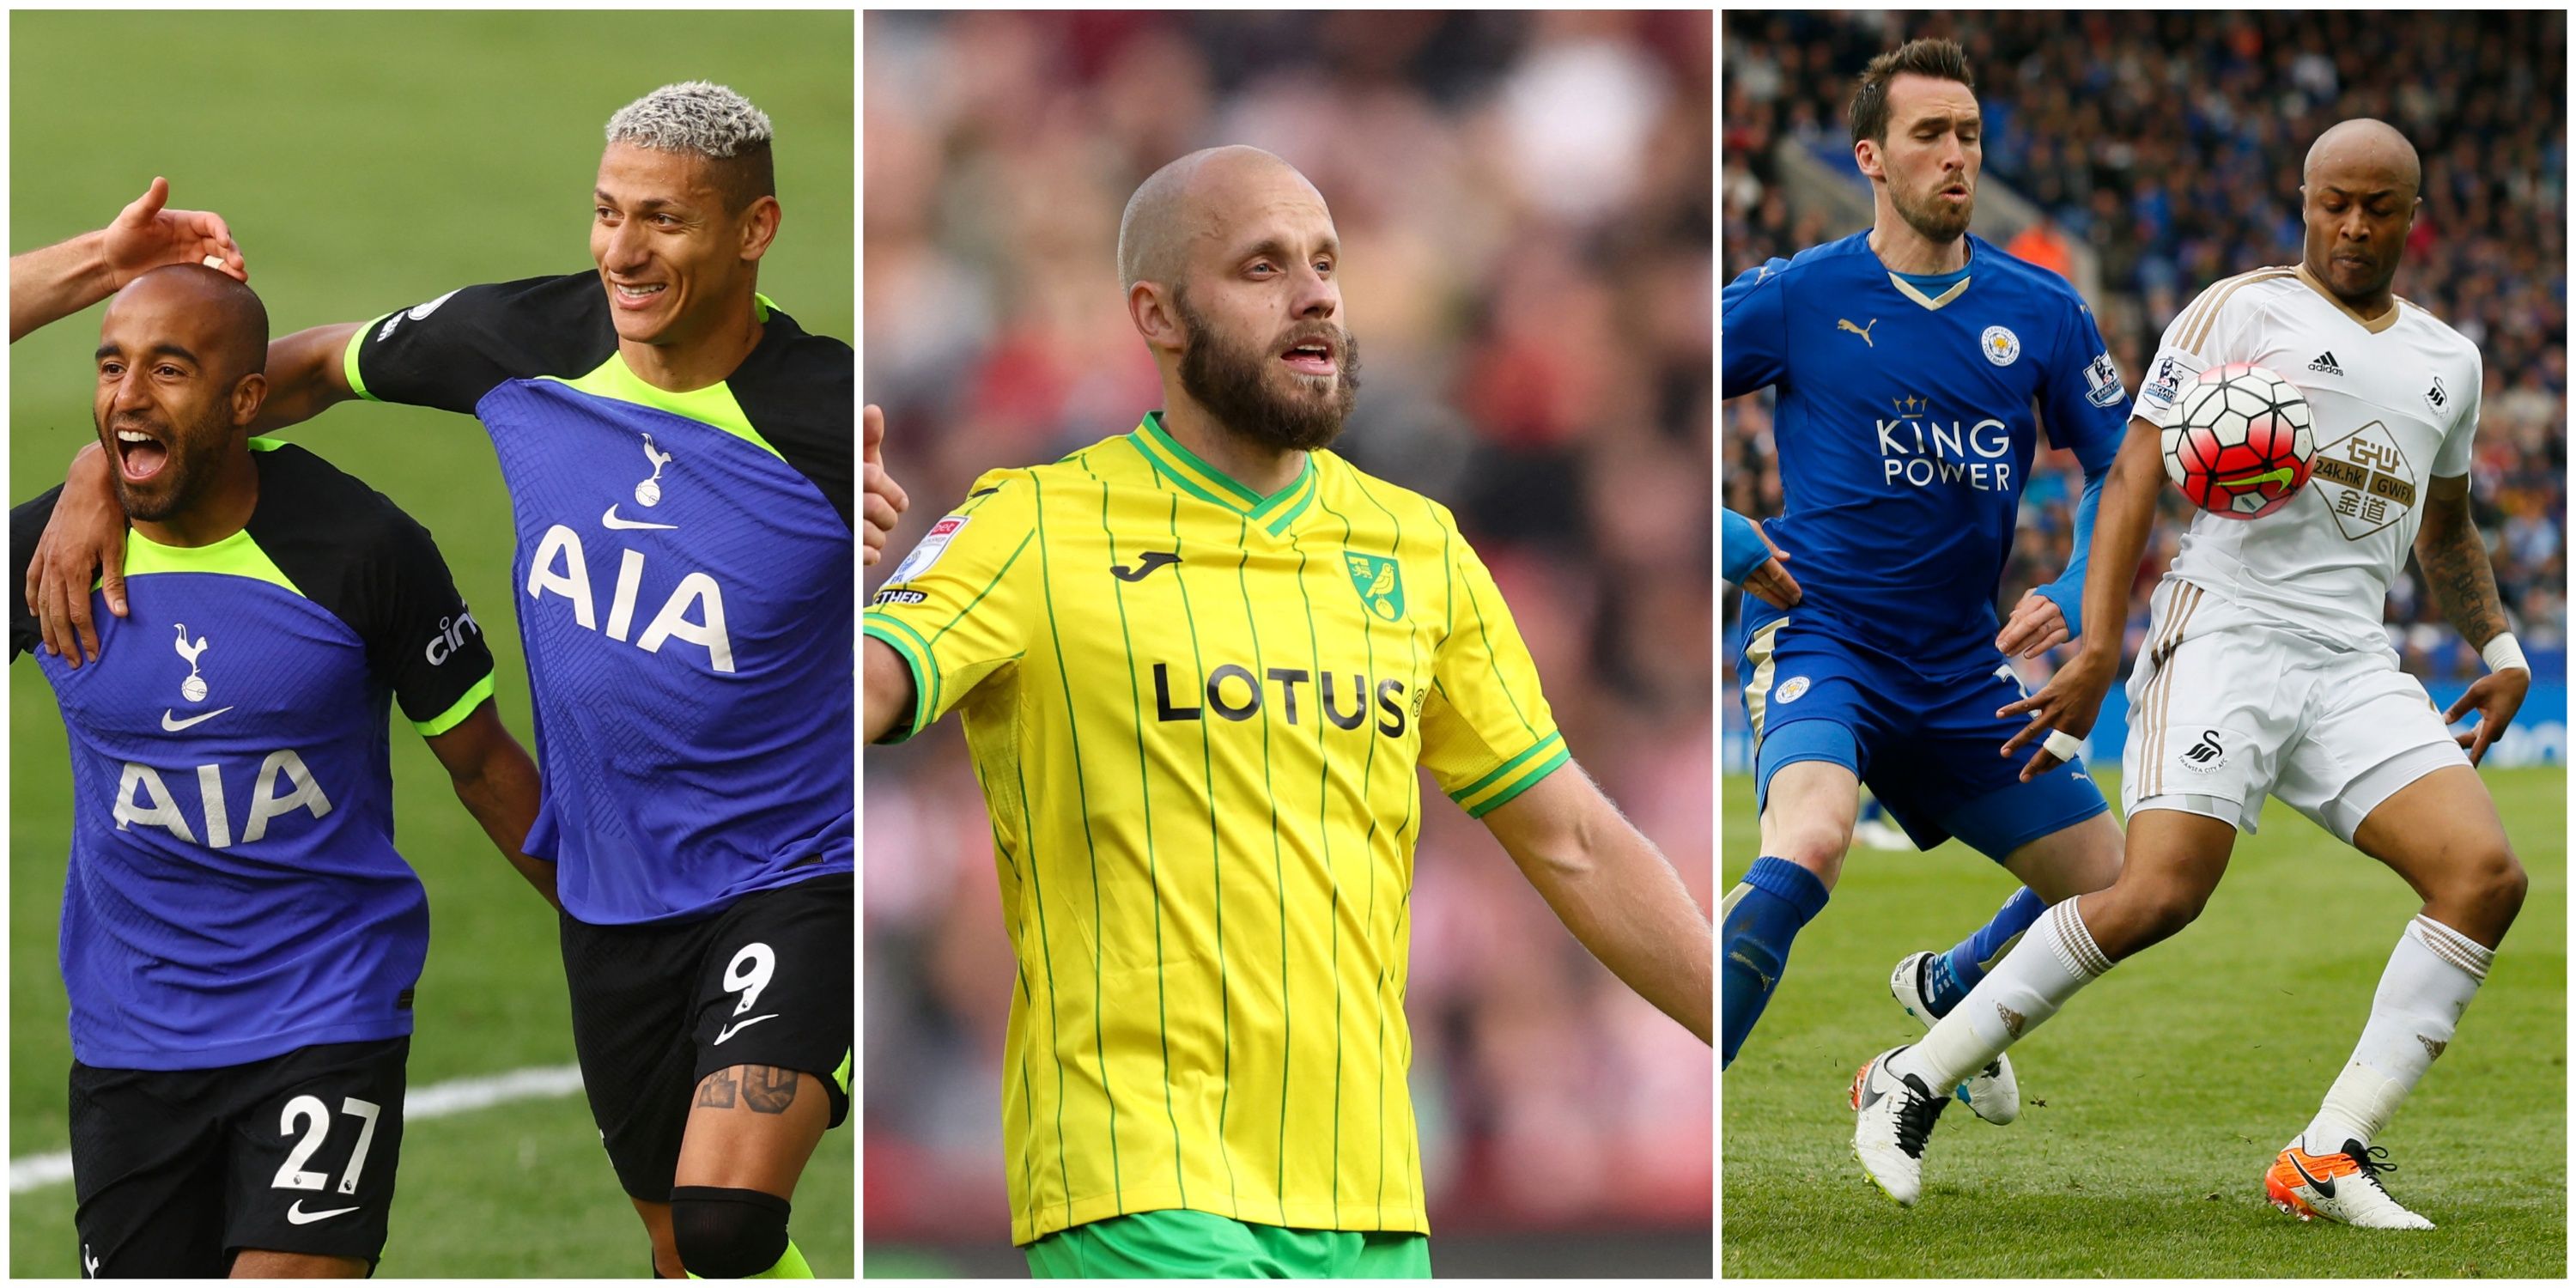 Lucas at Spurs, Pukki at Norwich and Ayew at Swansea